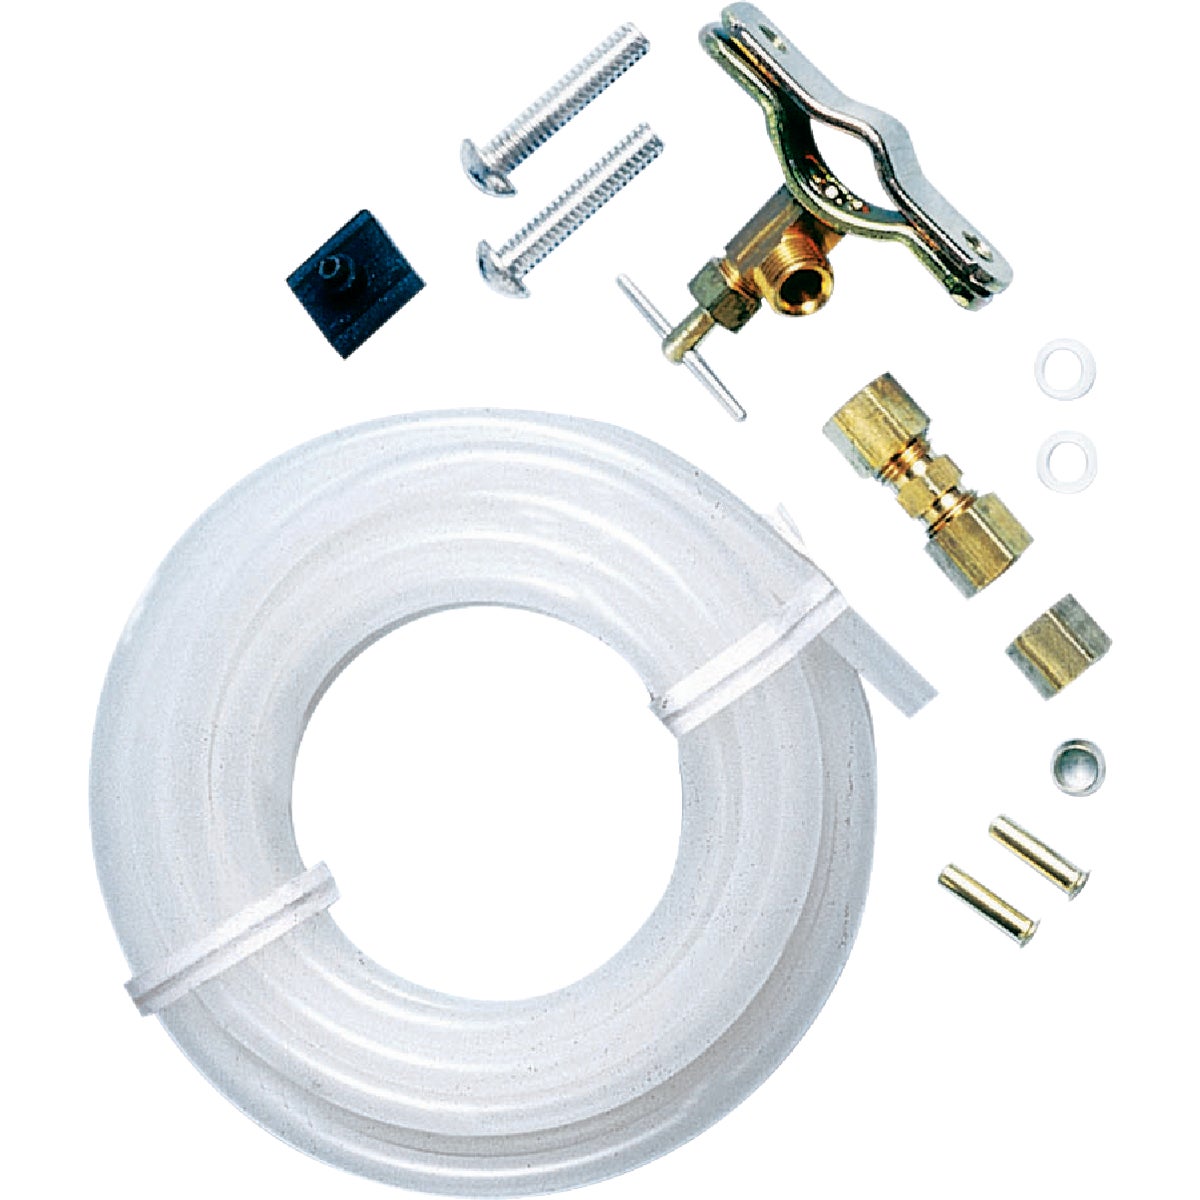 Do it 25 Ft. x 1/4 In. Poly Tubing Ice Maker Installation Kit